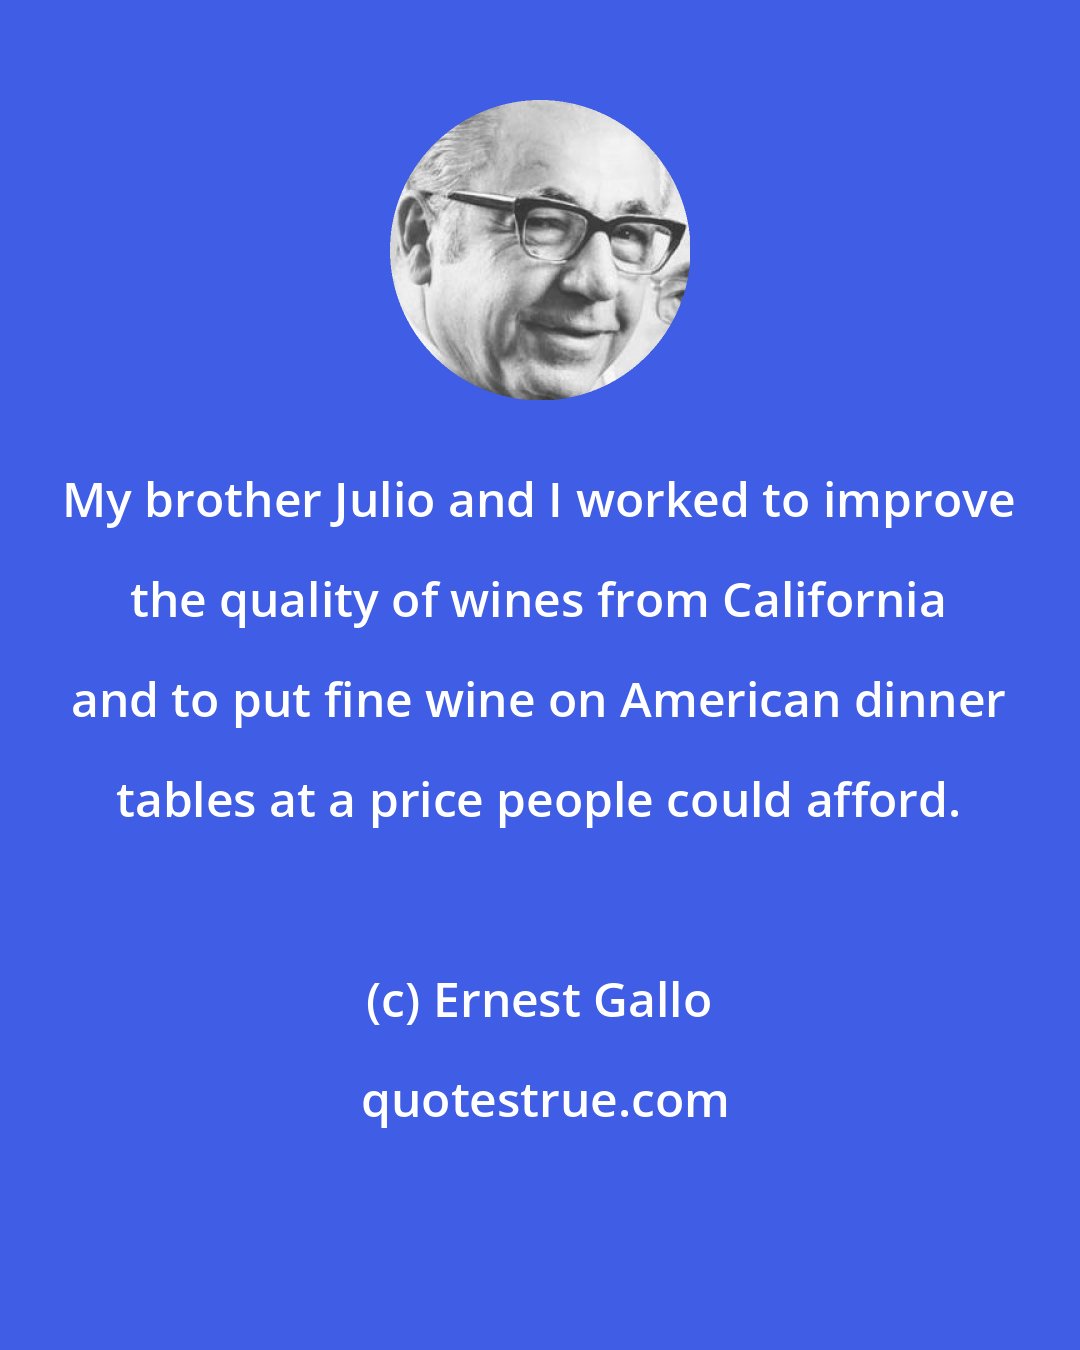 Ernest Gallo: My brother Julio and I worked to improve the quality of wines from California and to put fine wine on American dinner tables at a price people could afford.